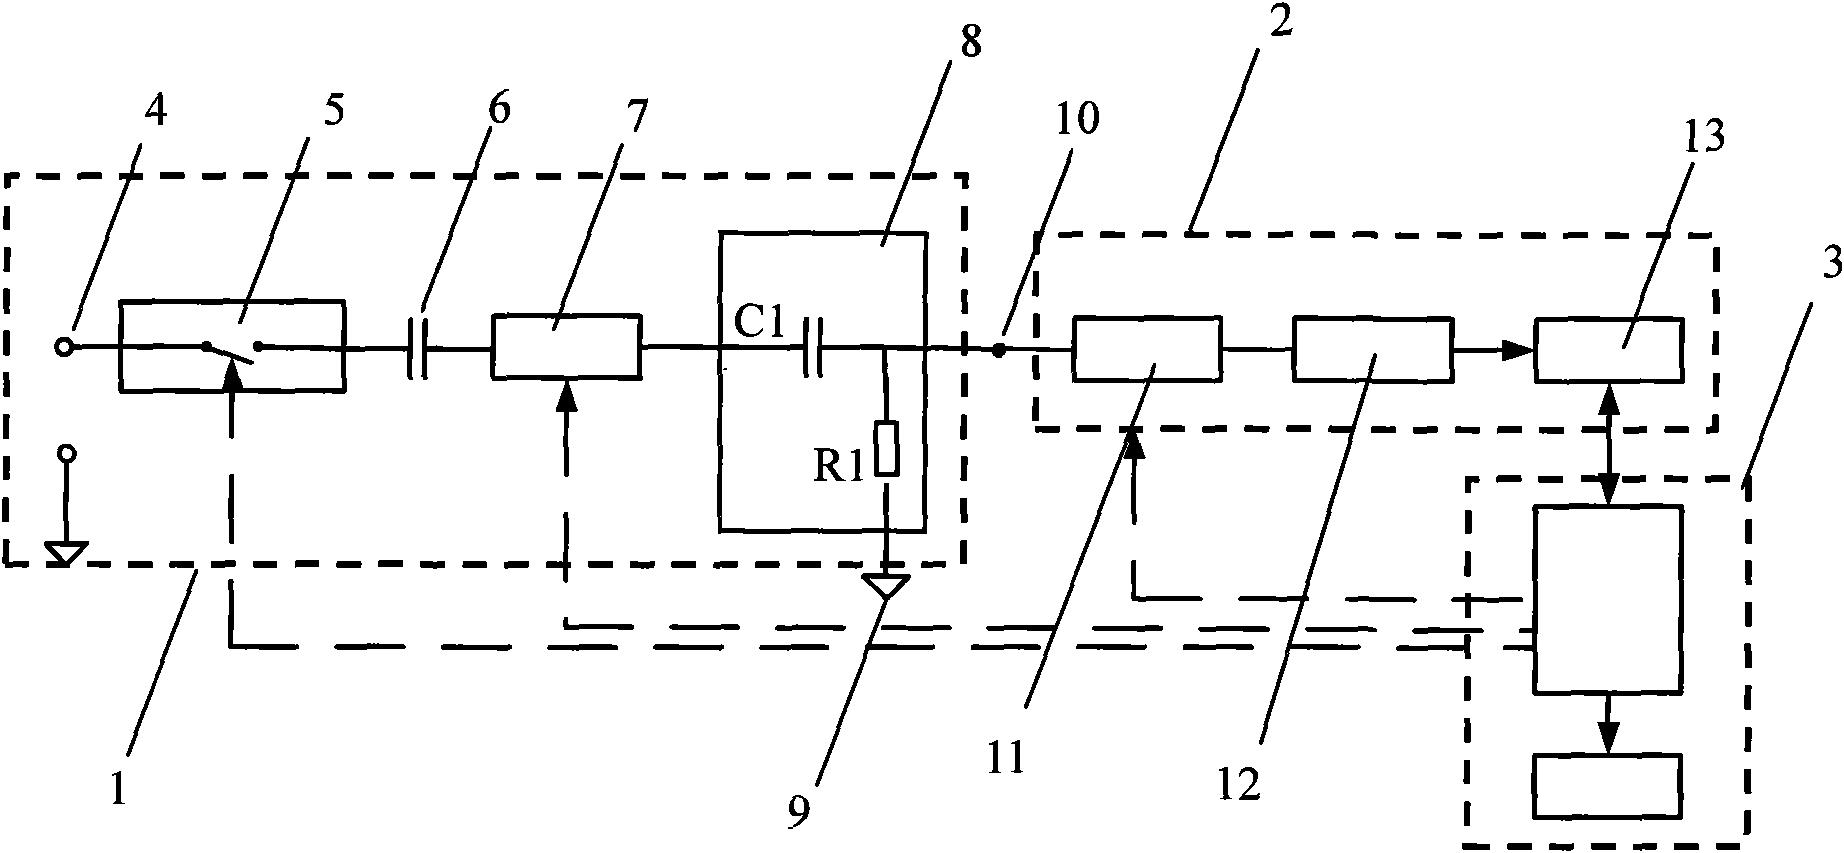 Alternating current signal measurement device, system and method